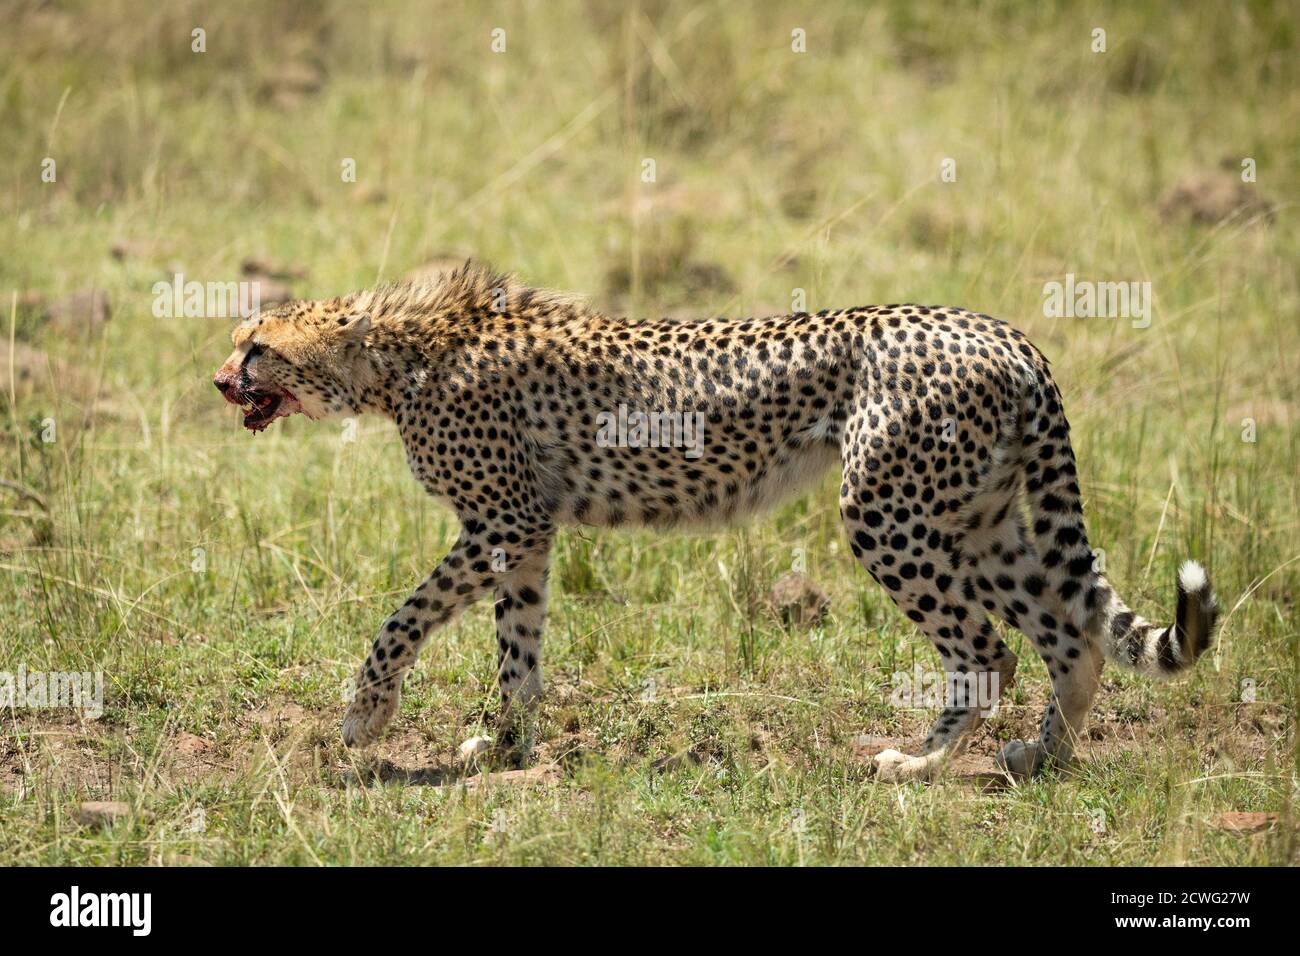 Adult cheetah with mouth and teeth covered in blood walking in Masai Mara in Kenya Stock Photo